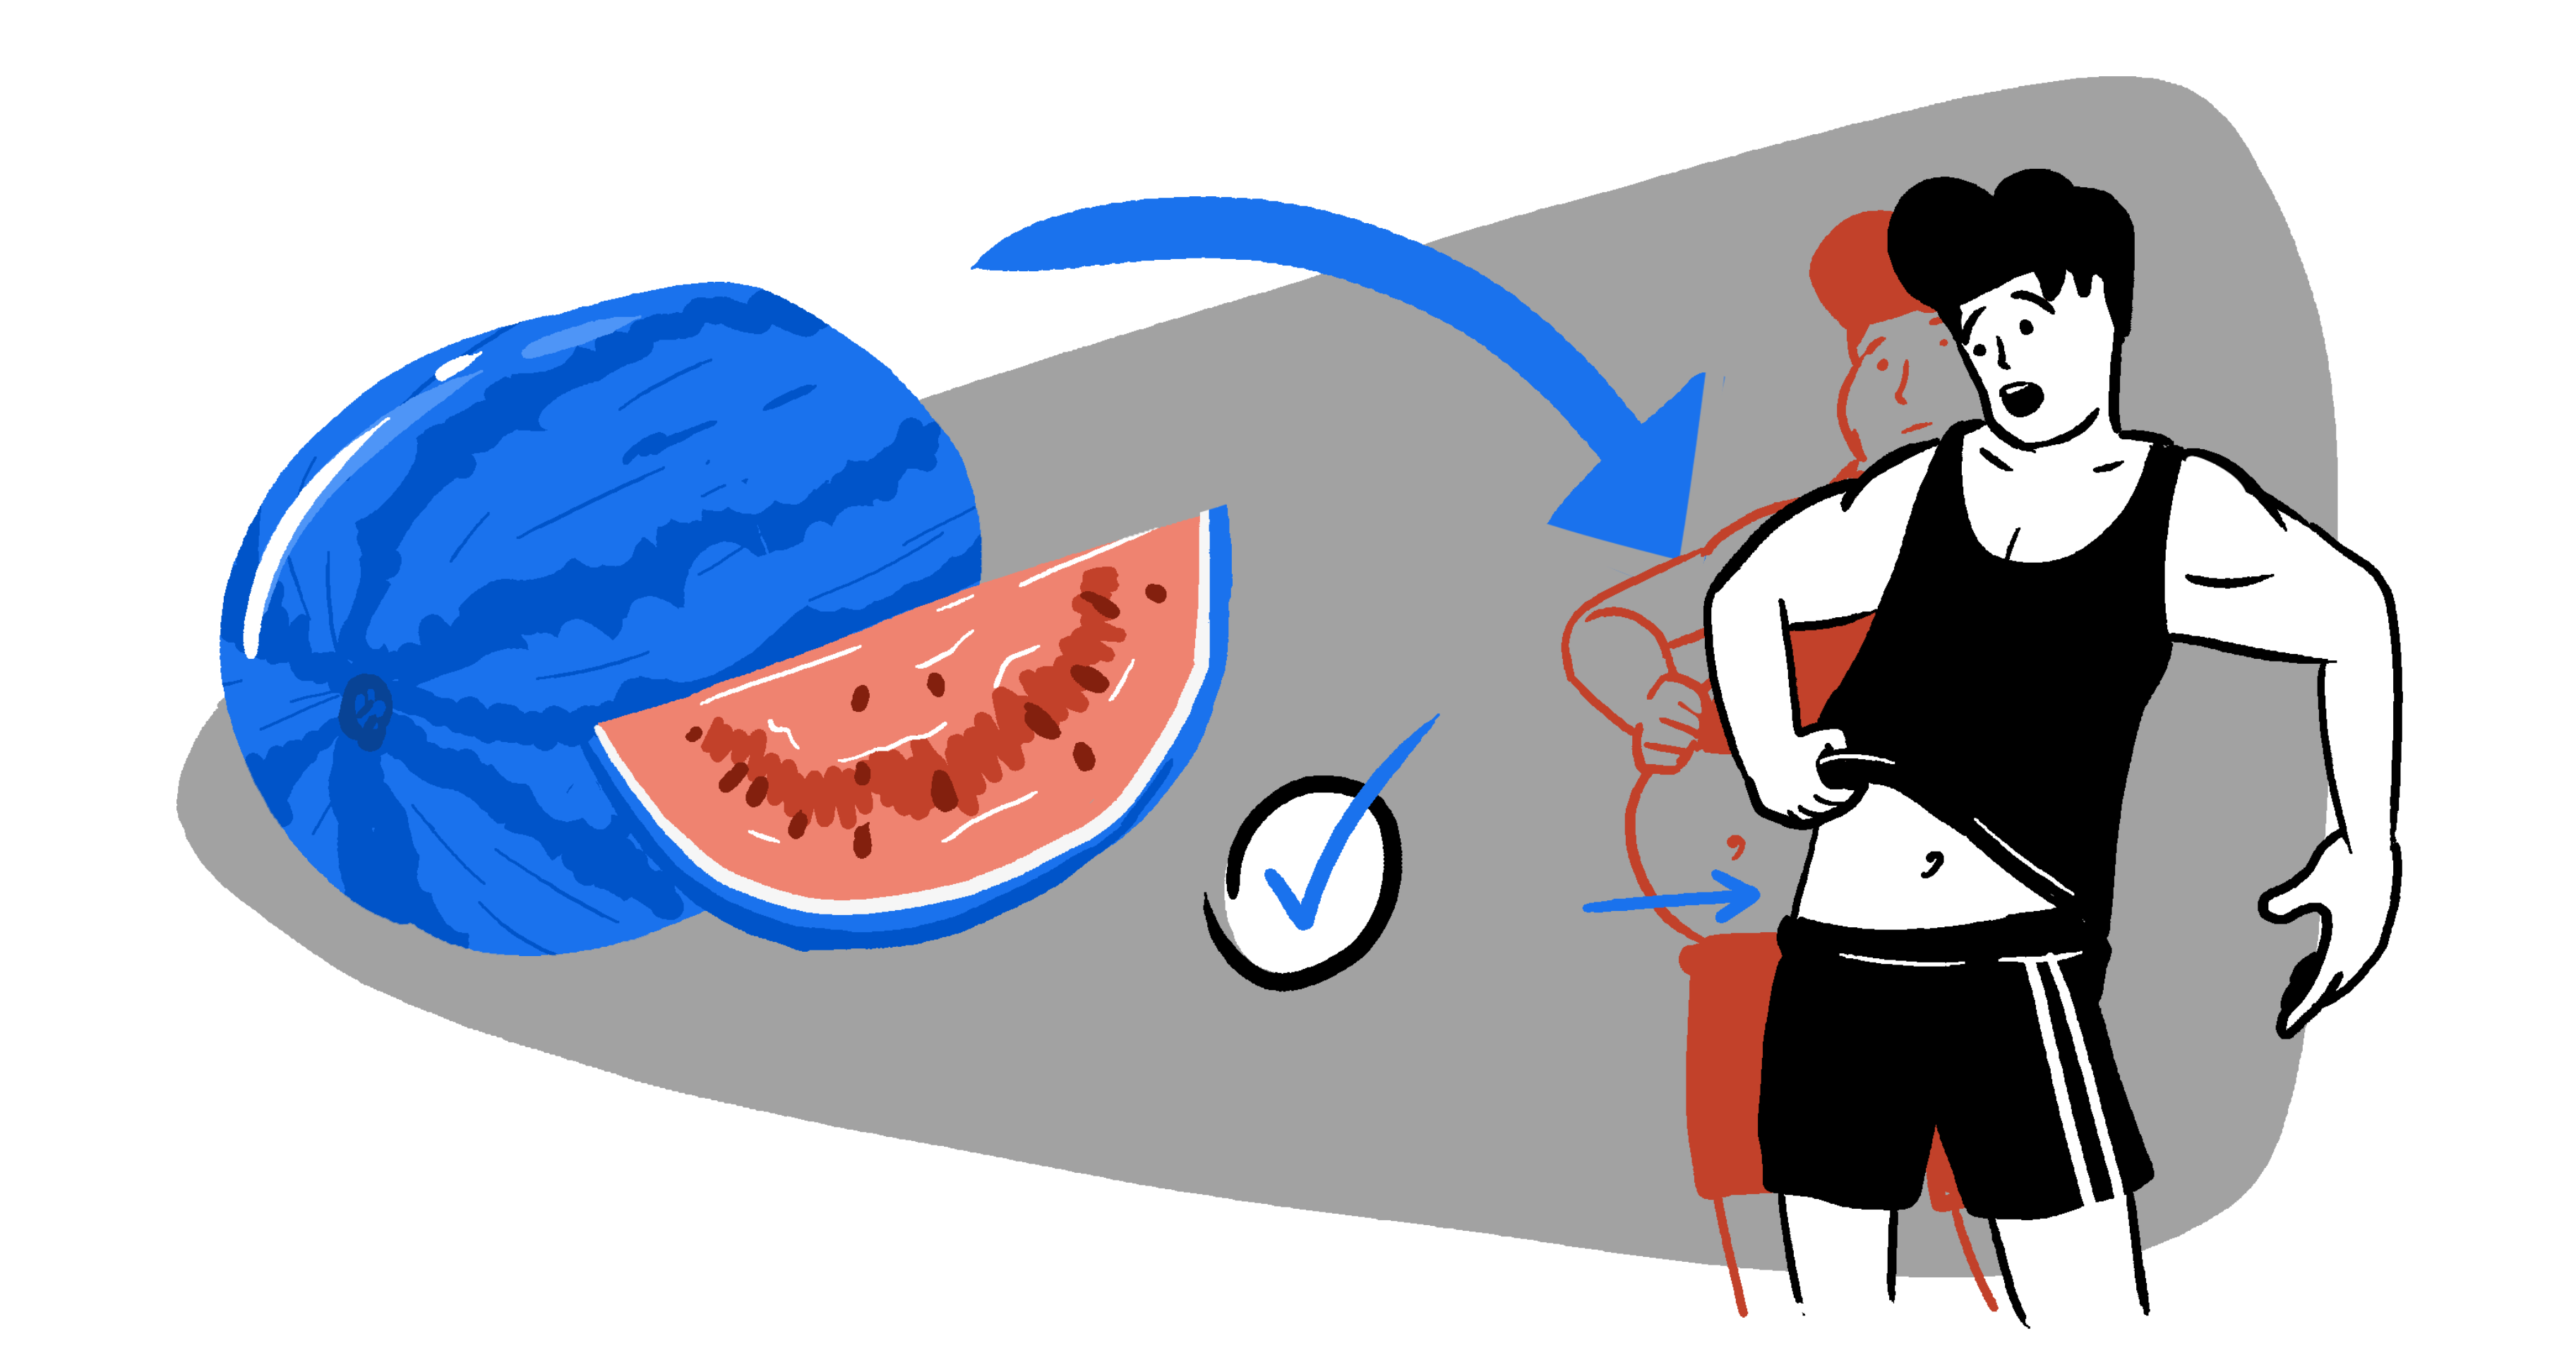 A guy is holding his belly with a sliced watermelon next to him and another, thinner version of the guy as a silhouette signifying he lost weight using the watermelon diet.